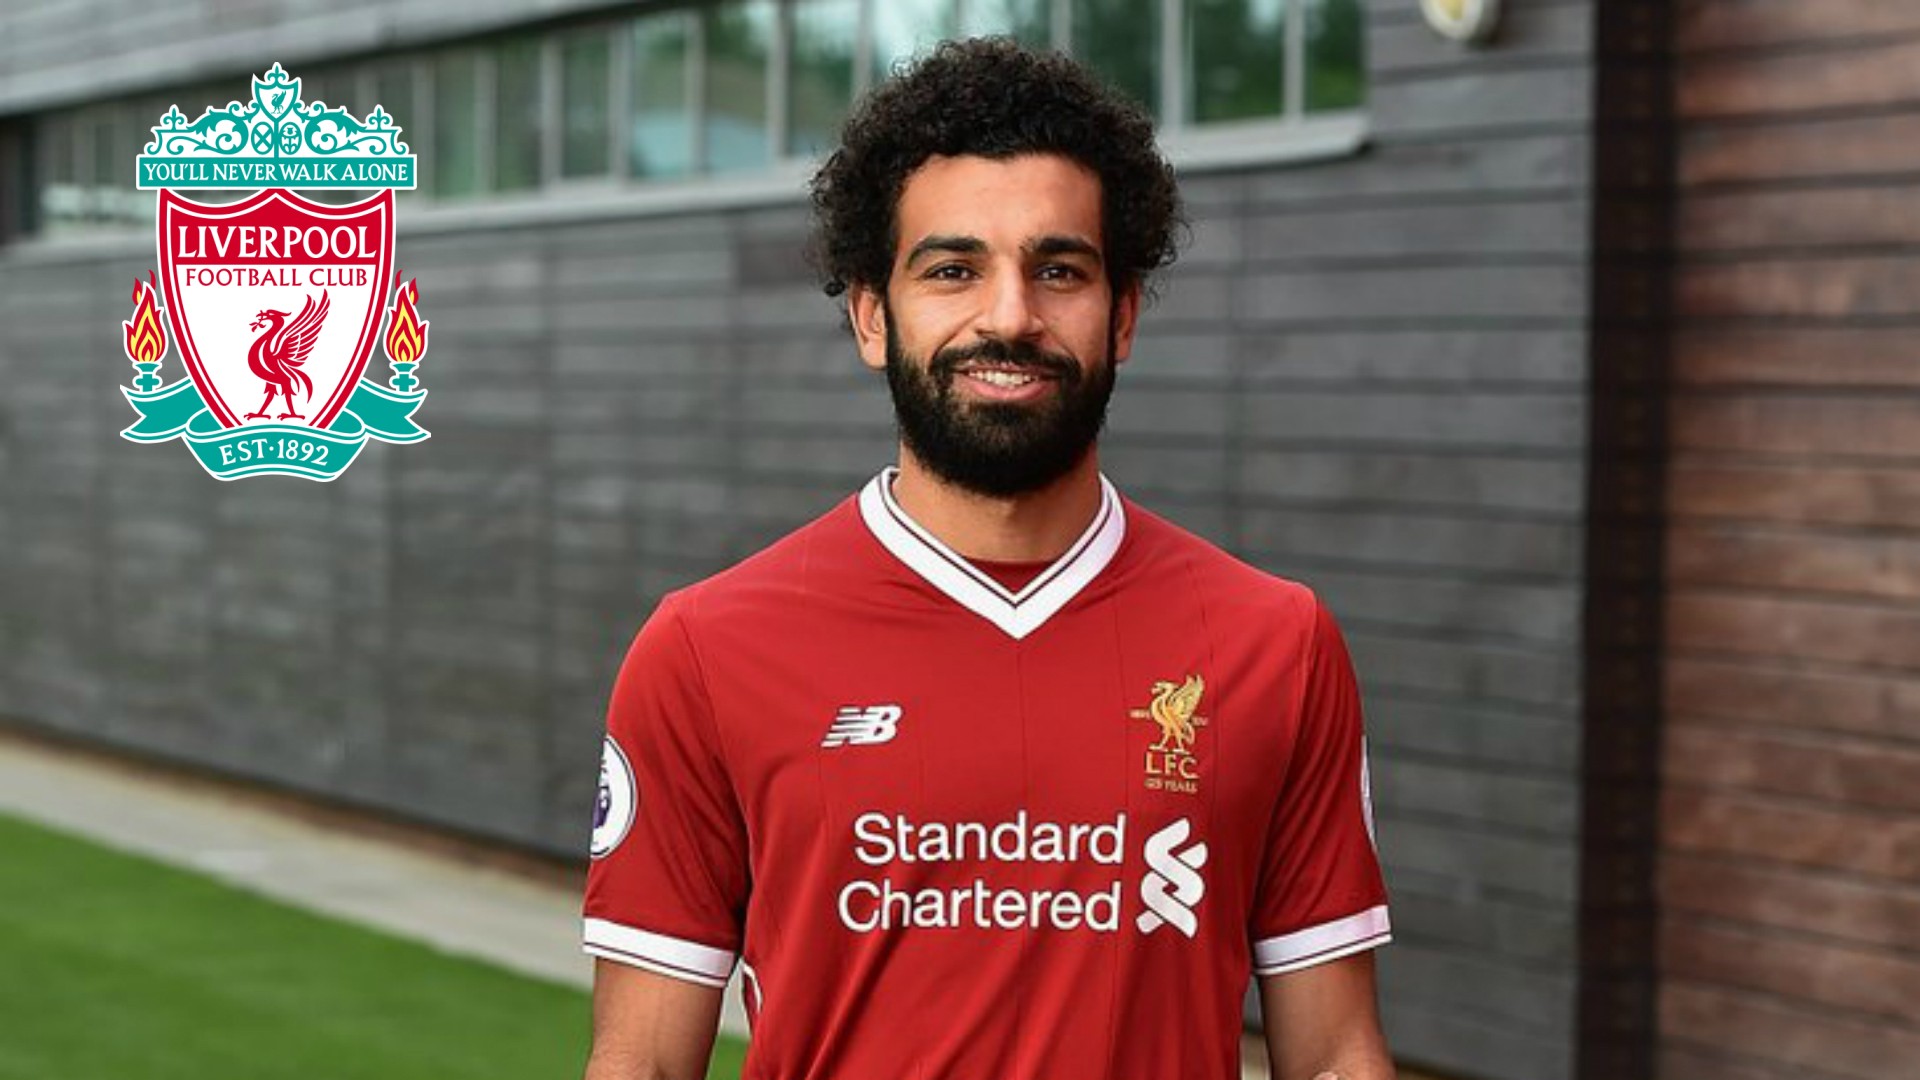 HD Wallpaper Liverpool Mohamed Salah with image resolution 1920x1080 pixel. You can make this wallpaper for your Desktop Computer Backgrounds, Mac Wallpapers, Android Lock screen or iPhone Screensavers